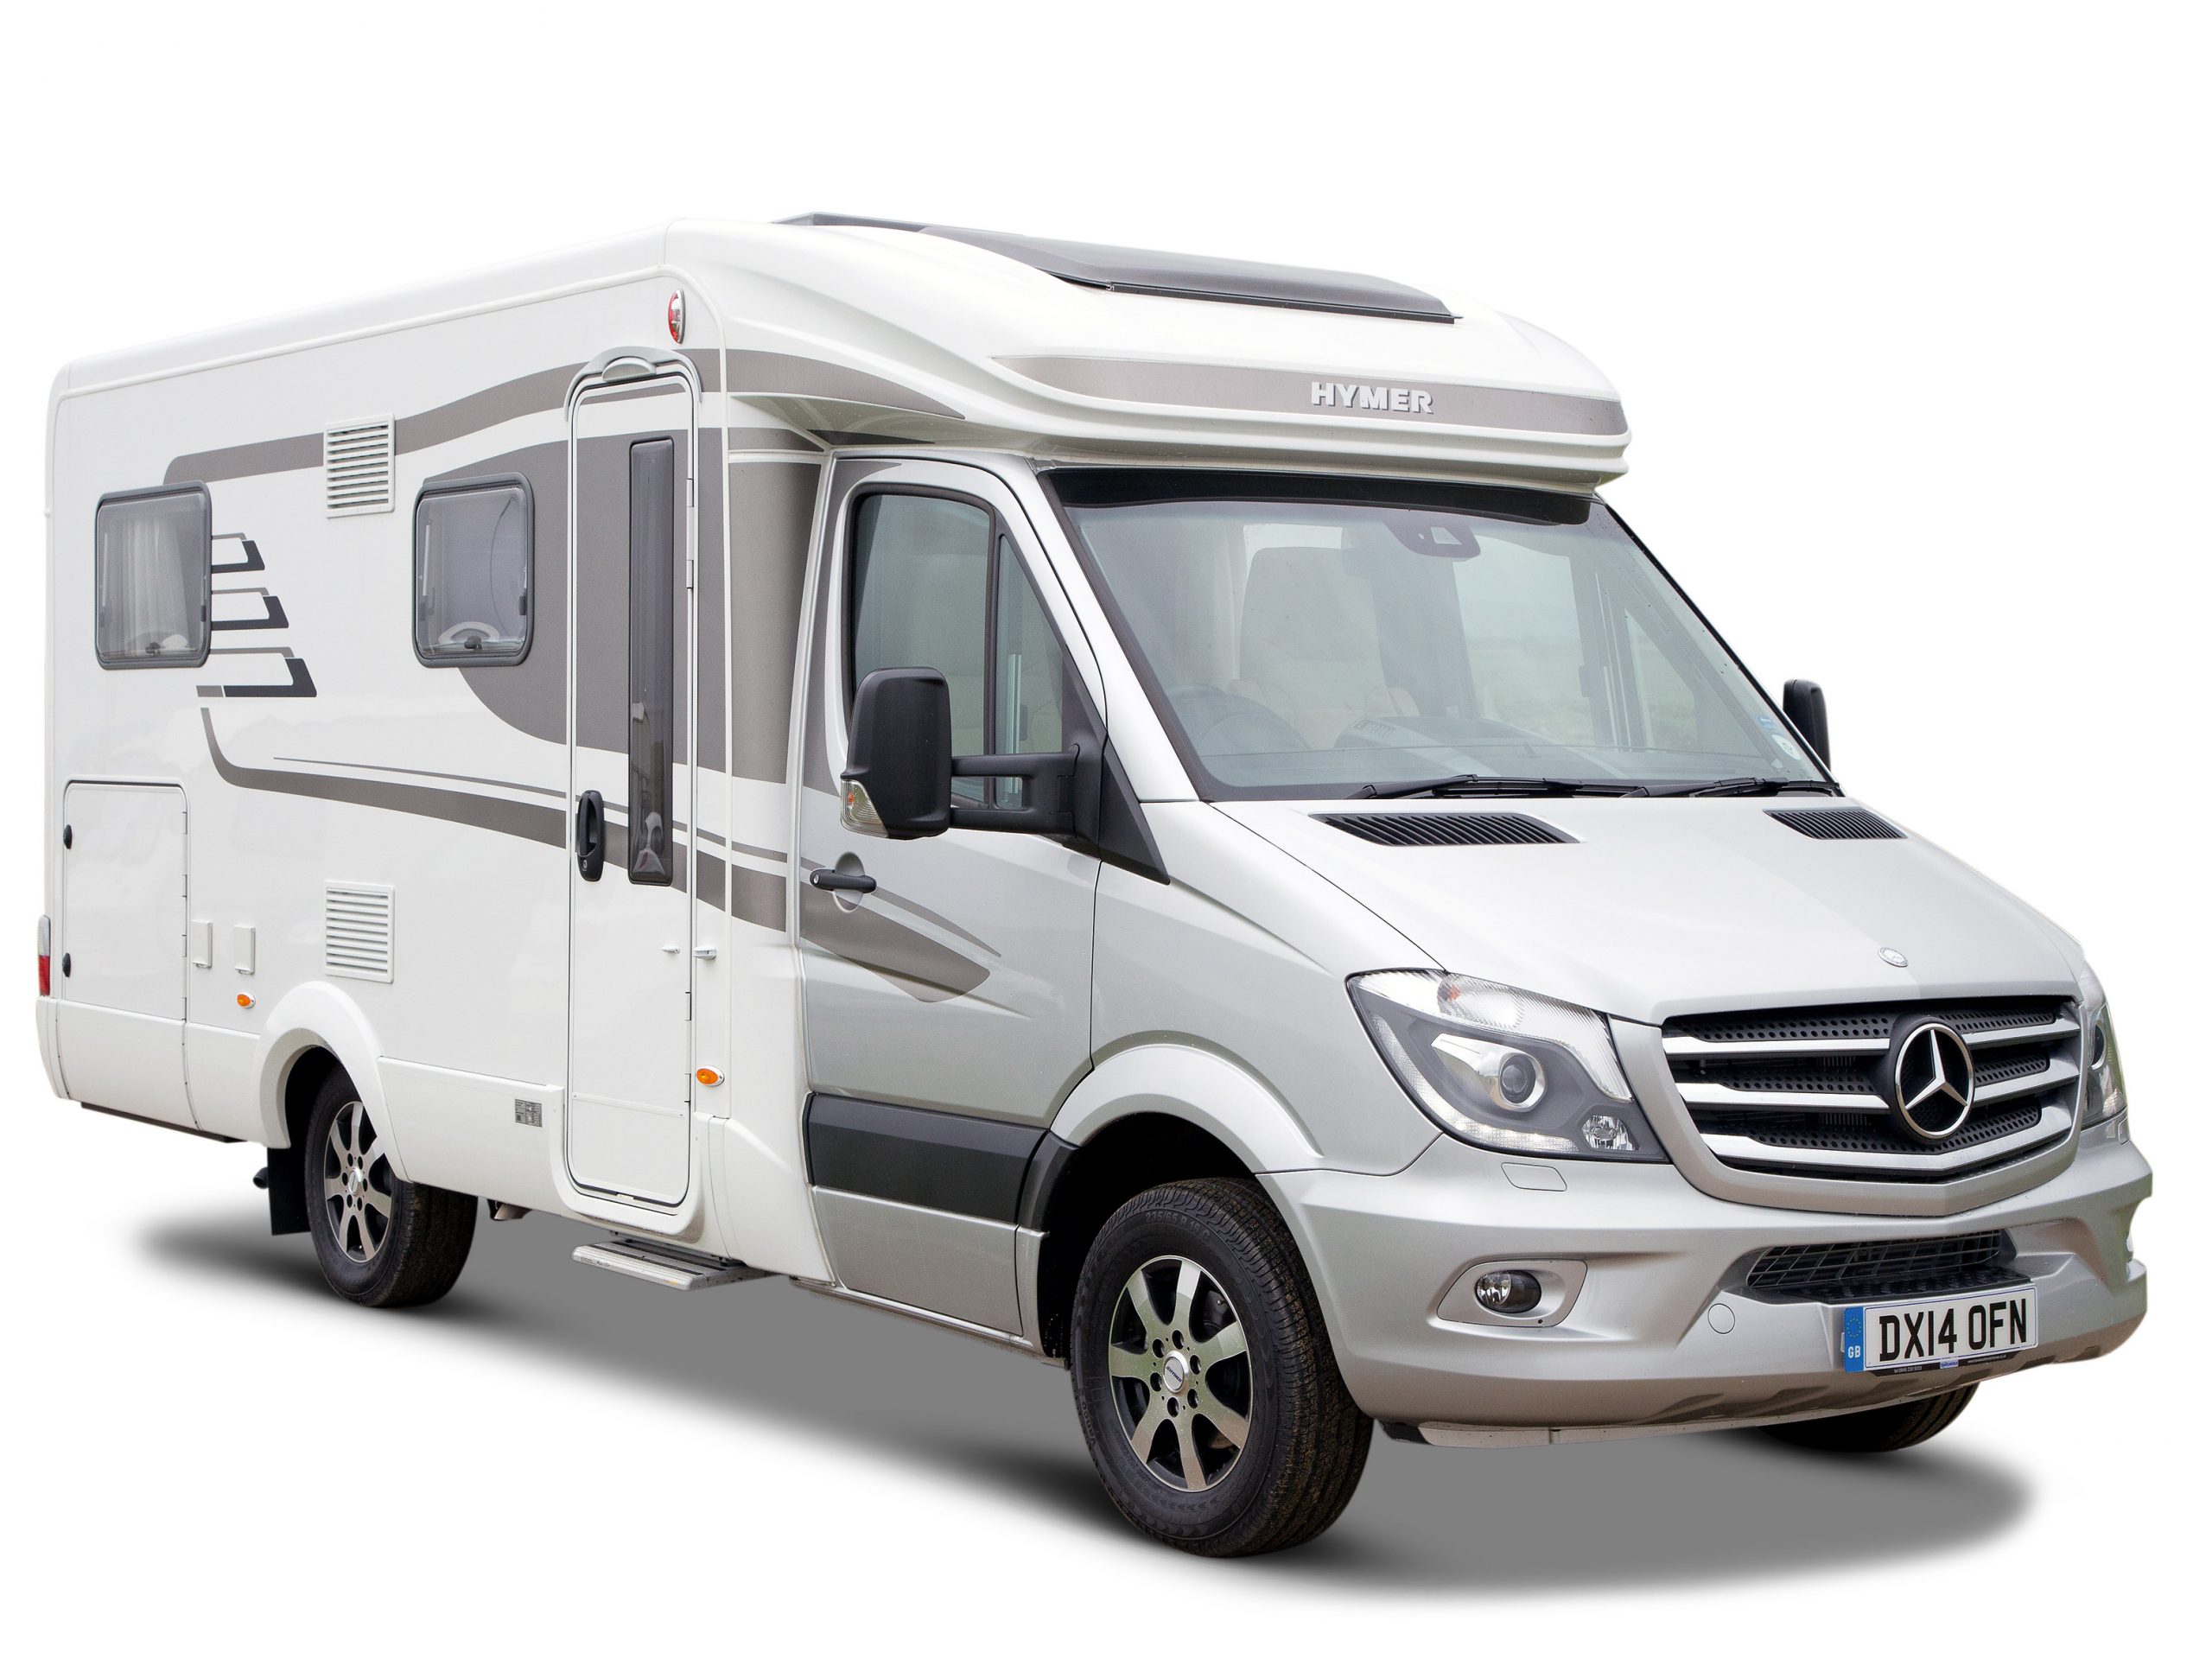 accident carton Failure Is front-wheel drive best for 'vans? - Practical Motorhome